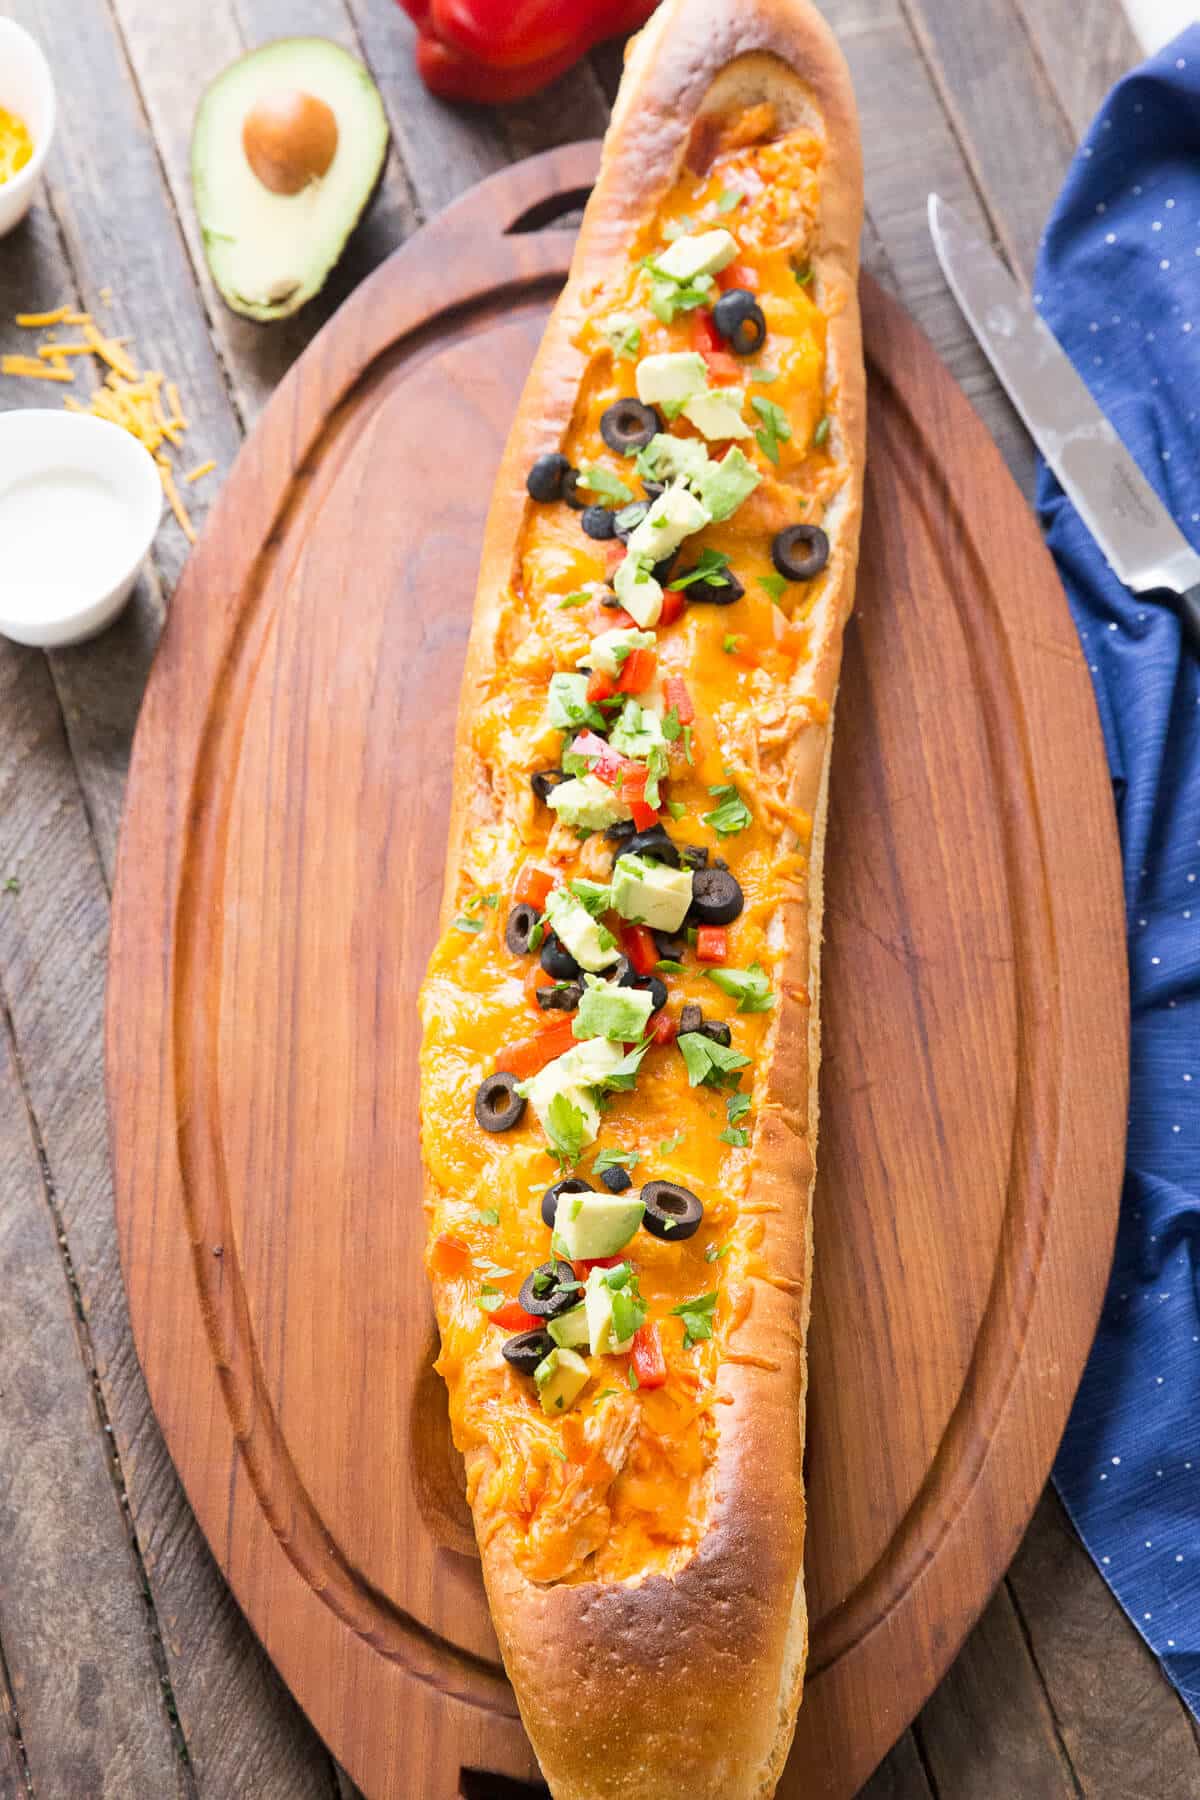 Chicken enchiladas are stuffed inside a loaf of French bread and baked! How simple is that?